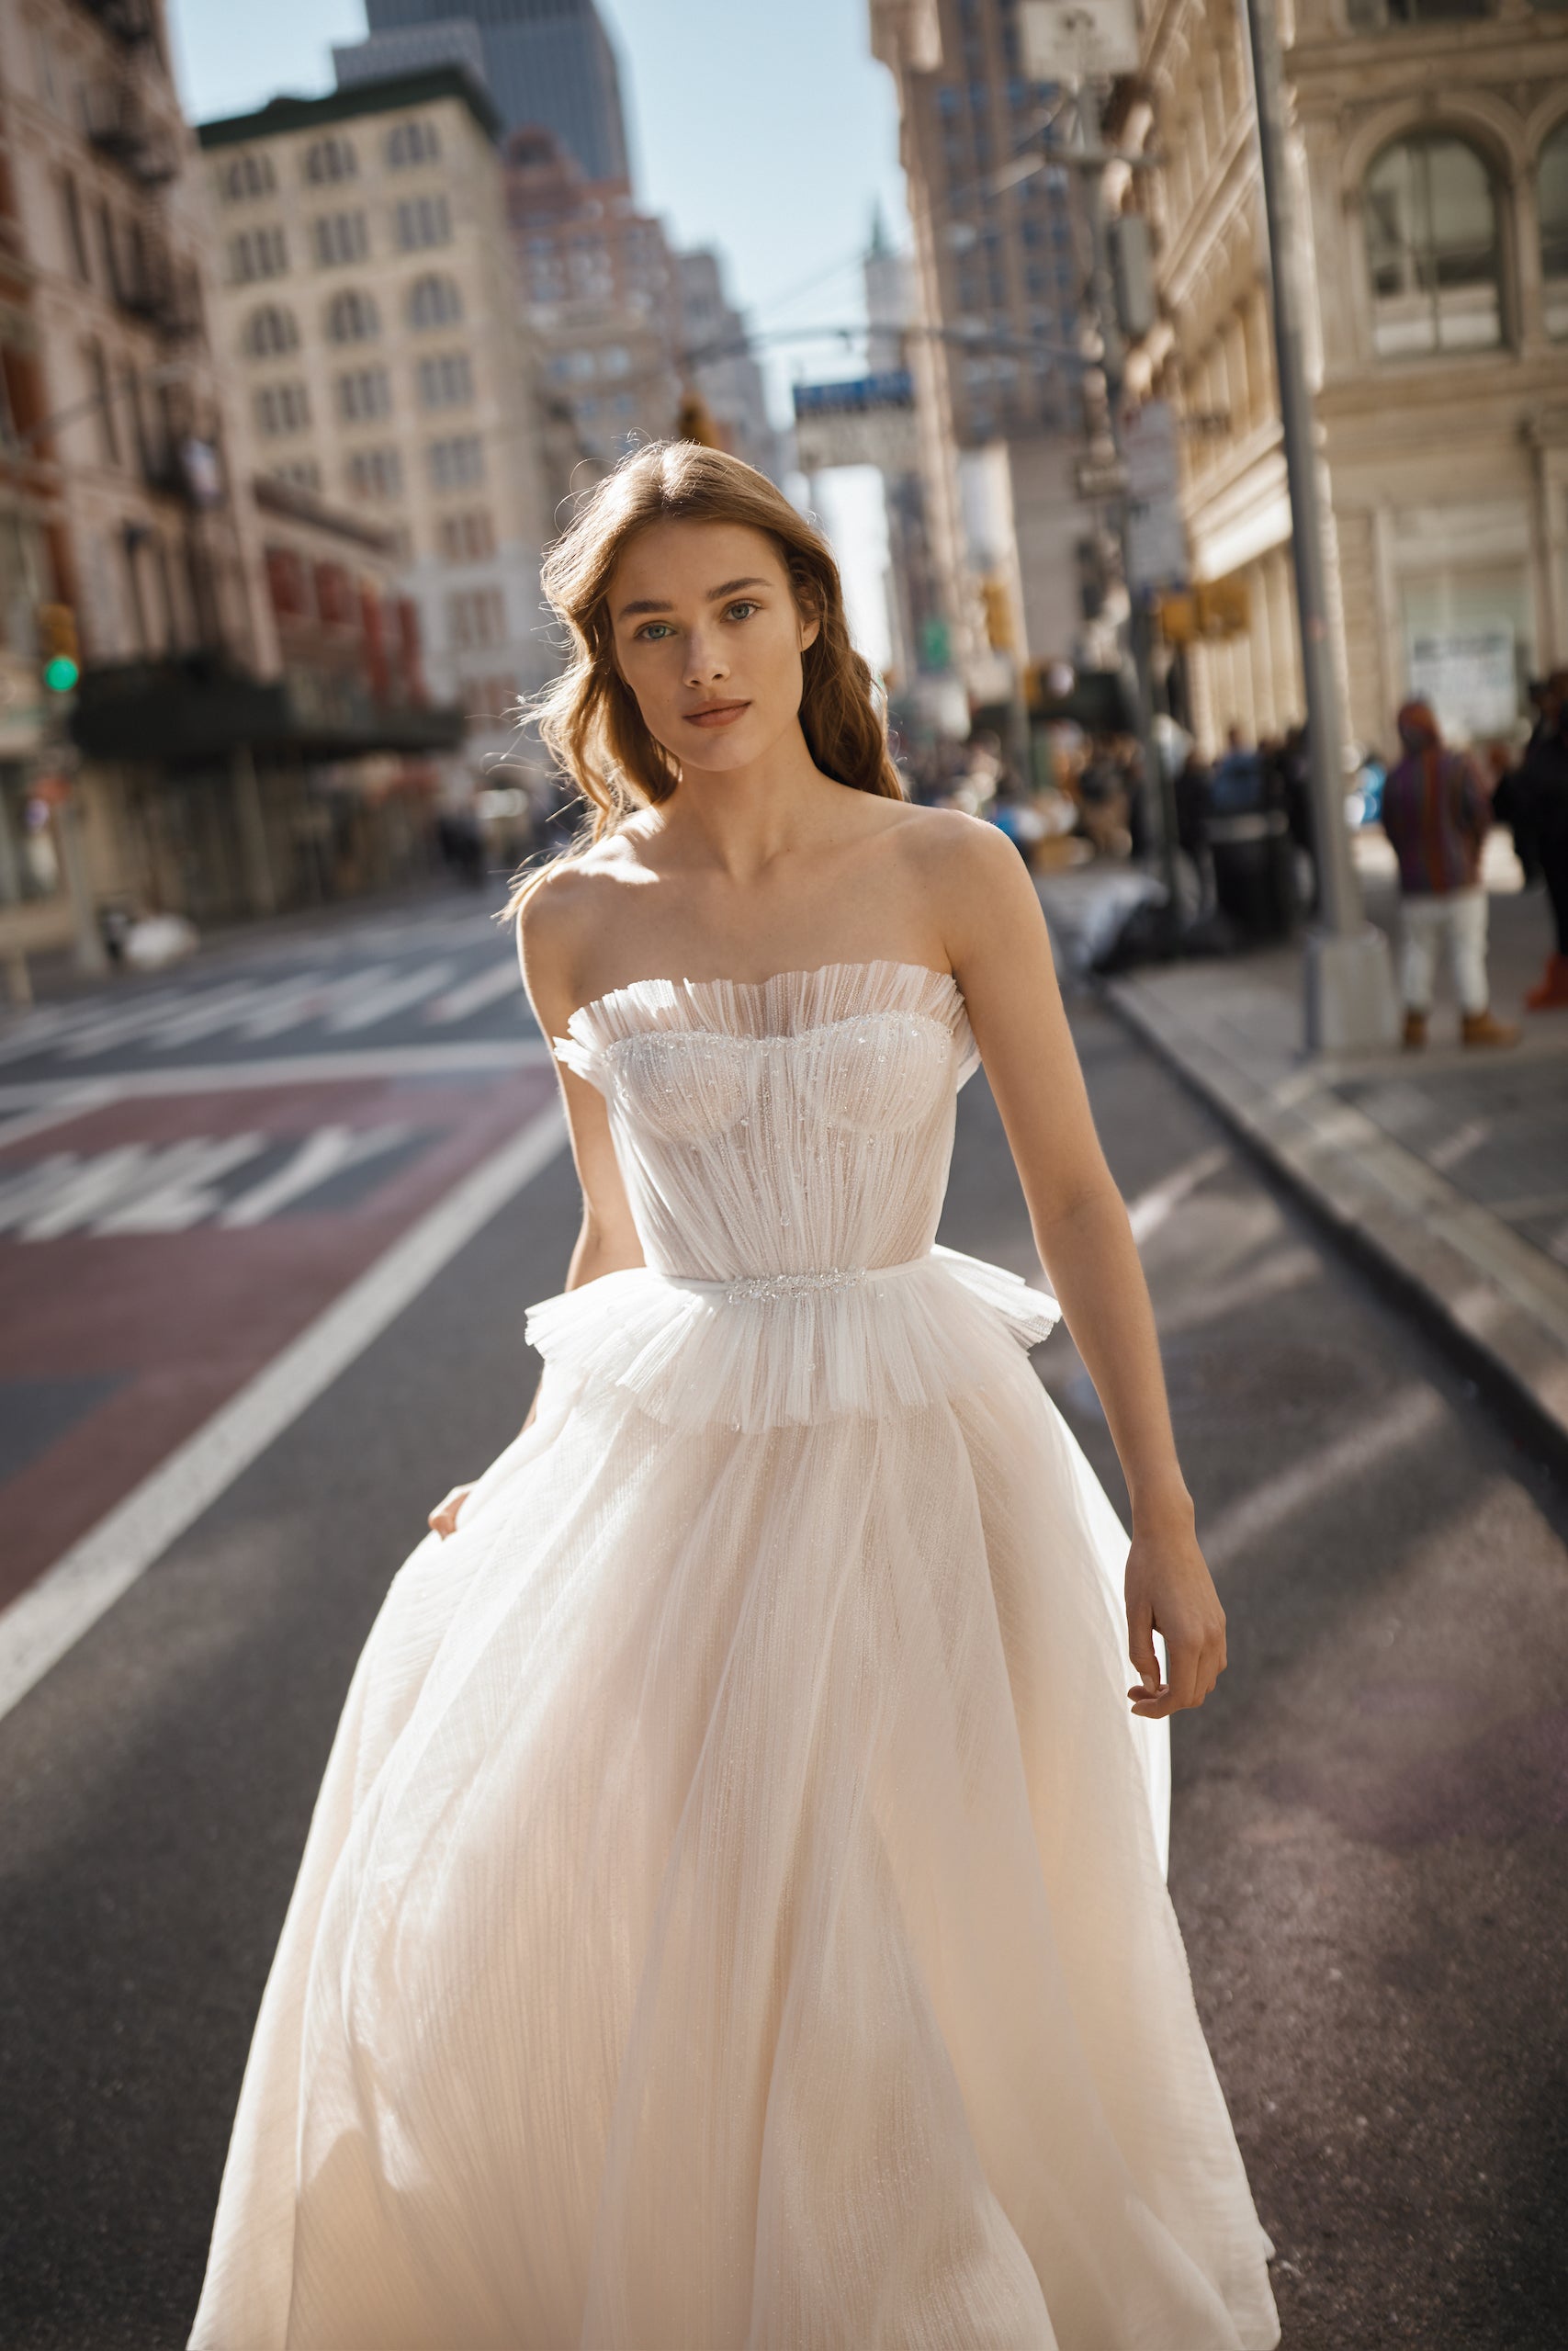 Chic And Ethereal Tulle A-Line Gown by Netta BenShabu Elite Couture - Image 1